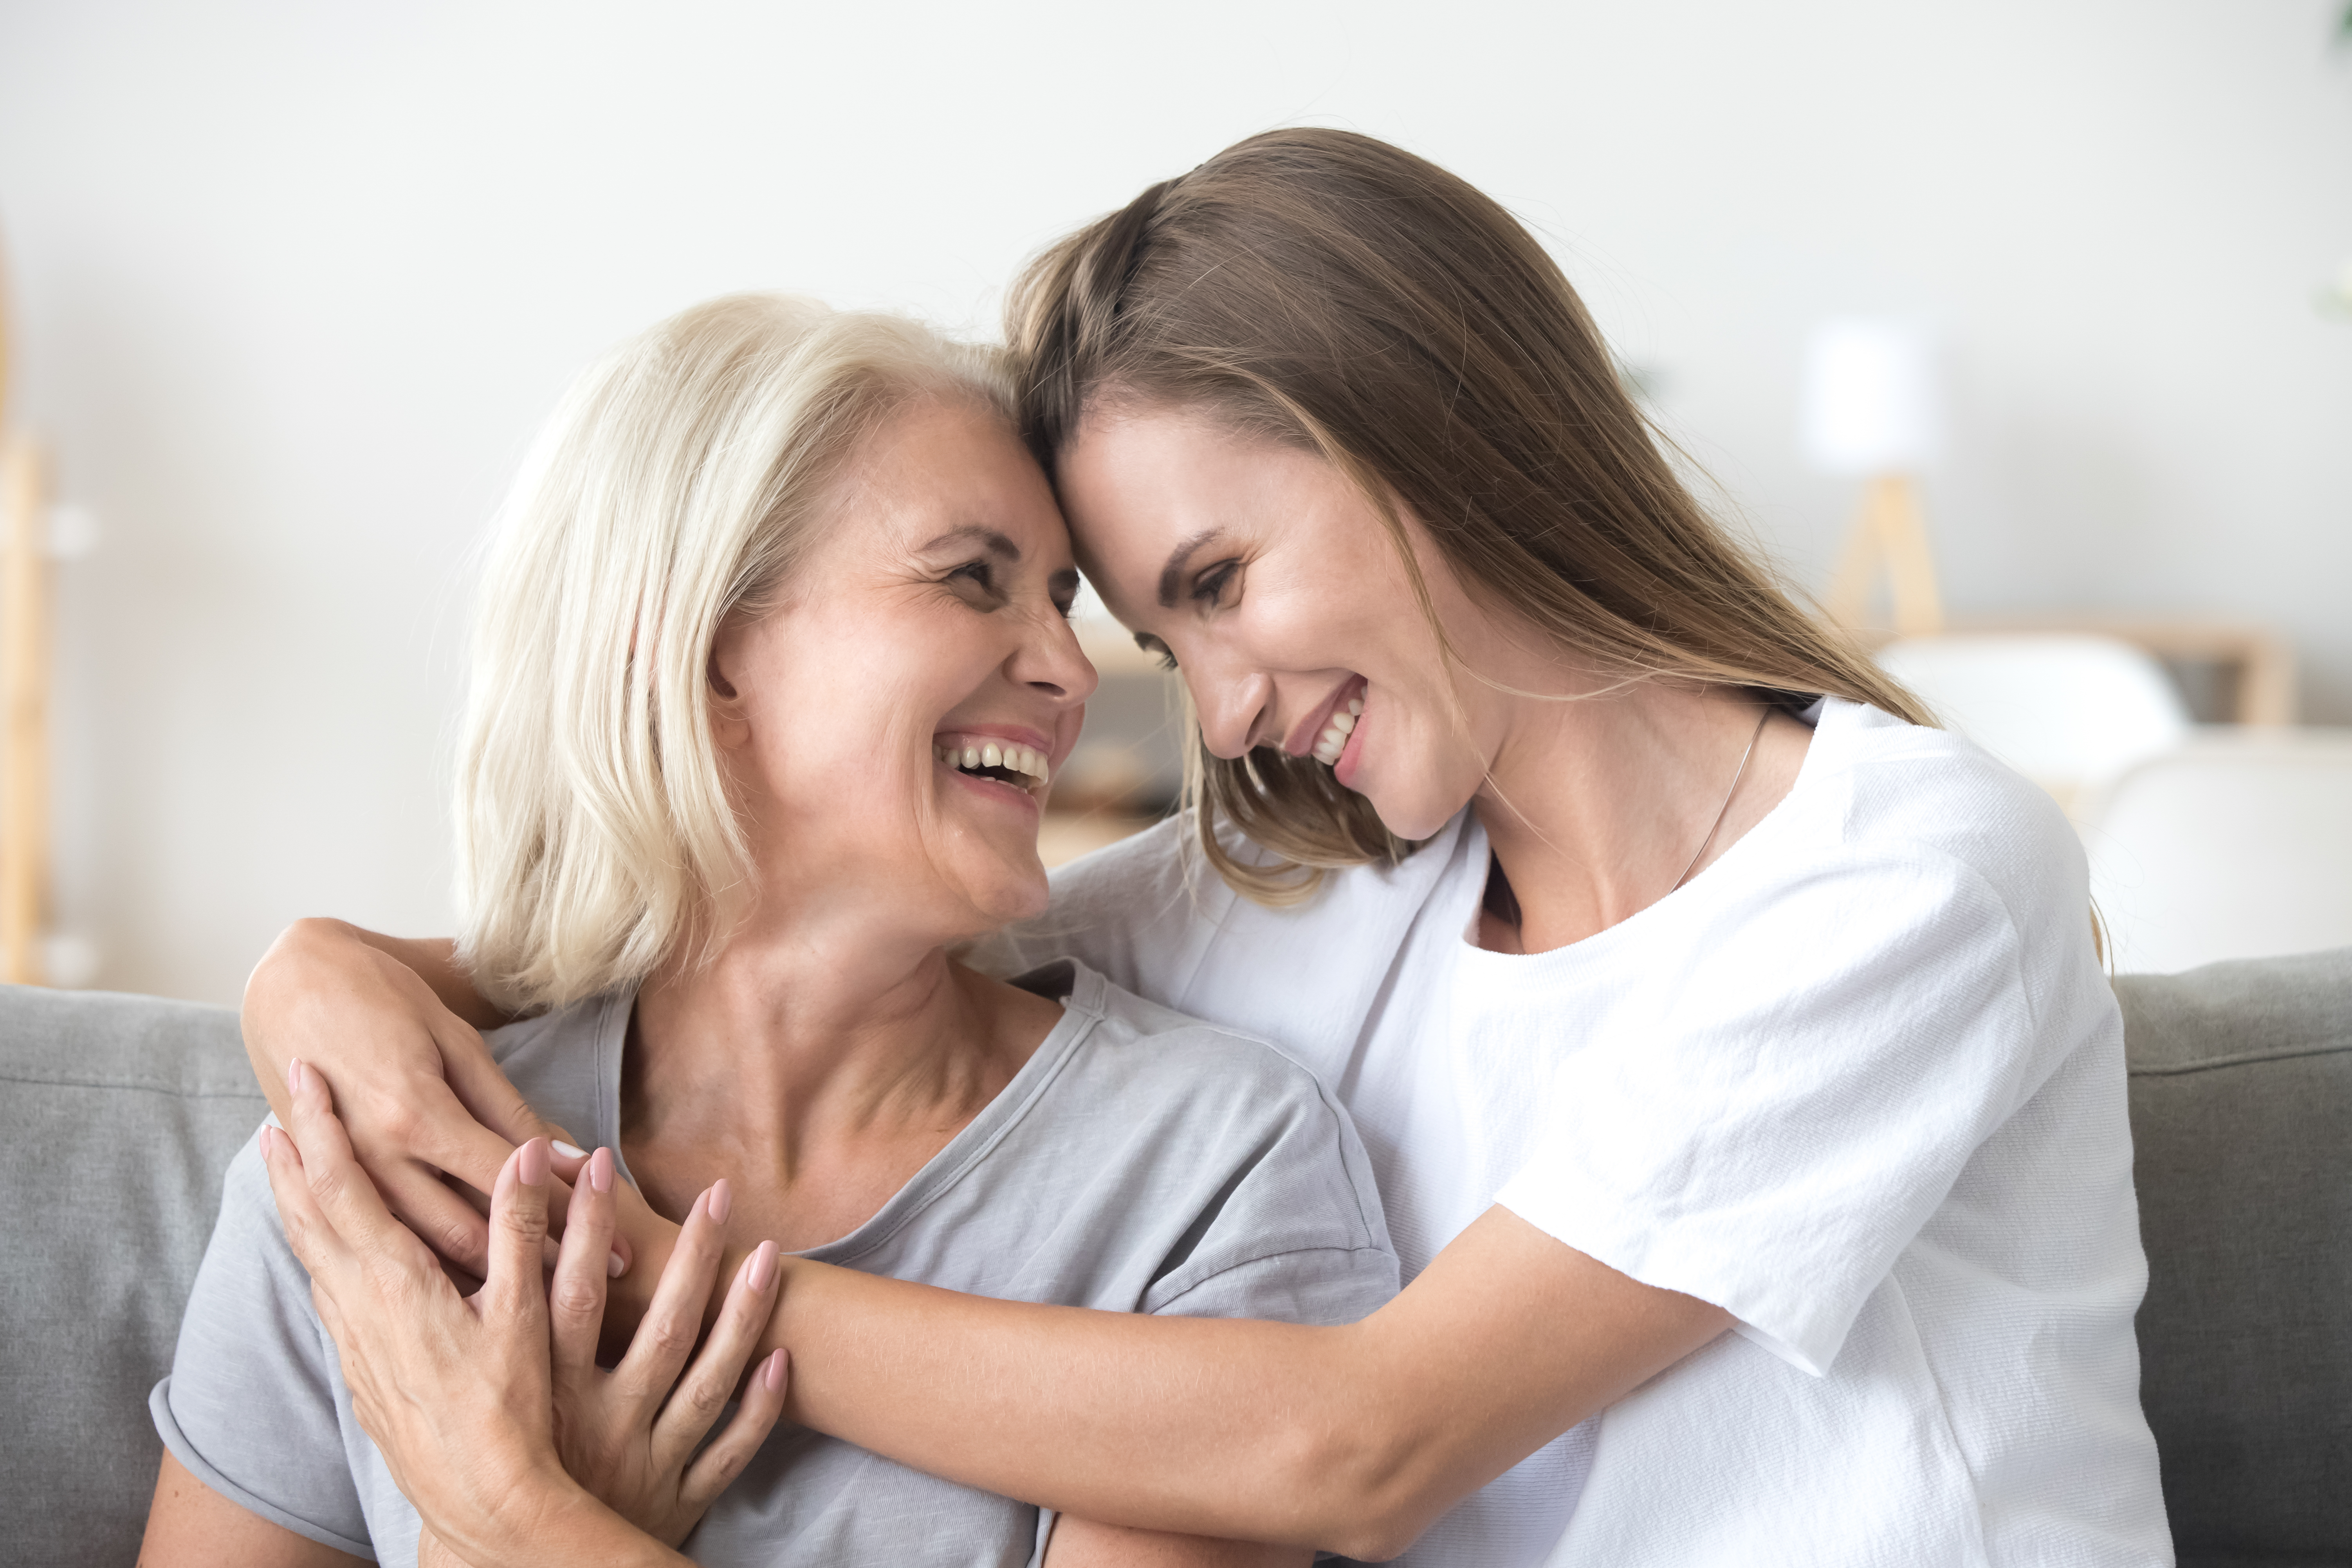 A young woman hugging a senior lady | Source: Shutterstock